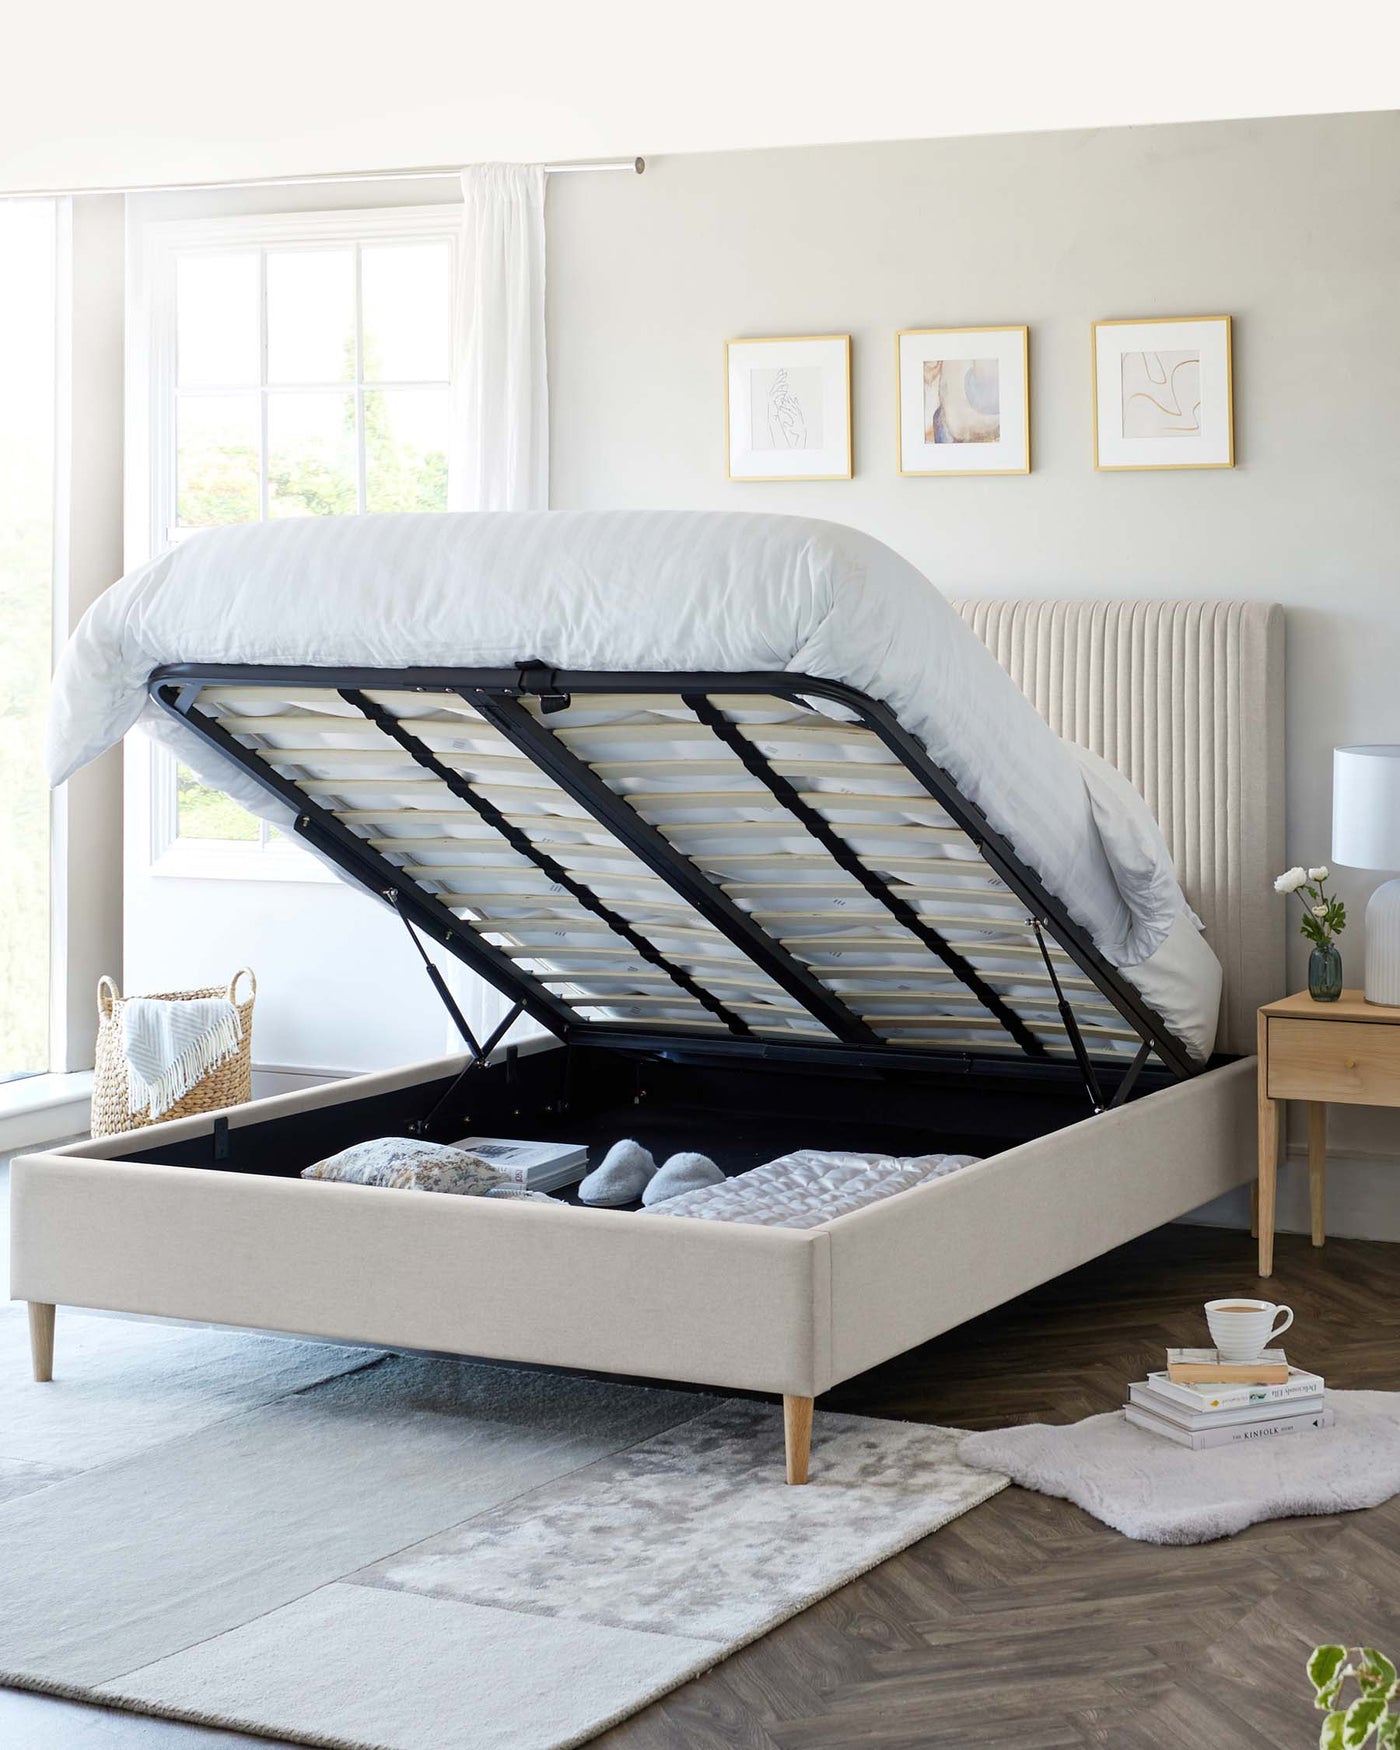 Contemporary light beige upholstered storage bed with a raised mattress platform revealing a spacious under-bed storage area, complemented by a light wood nightstand and a plush light grey area rug.